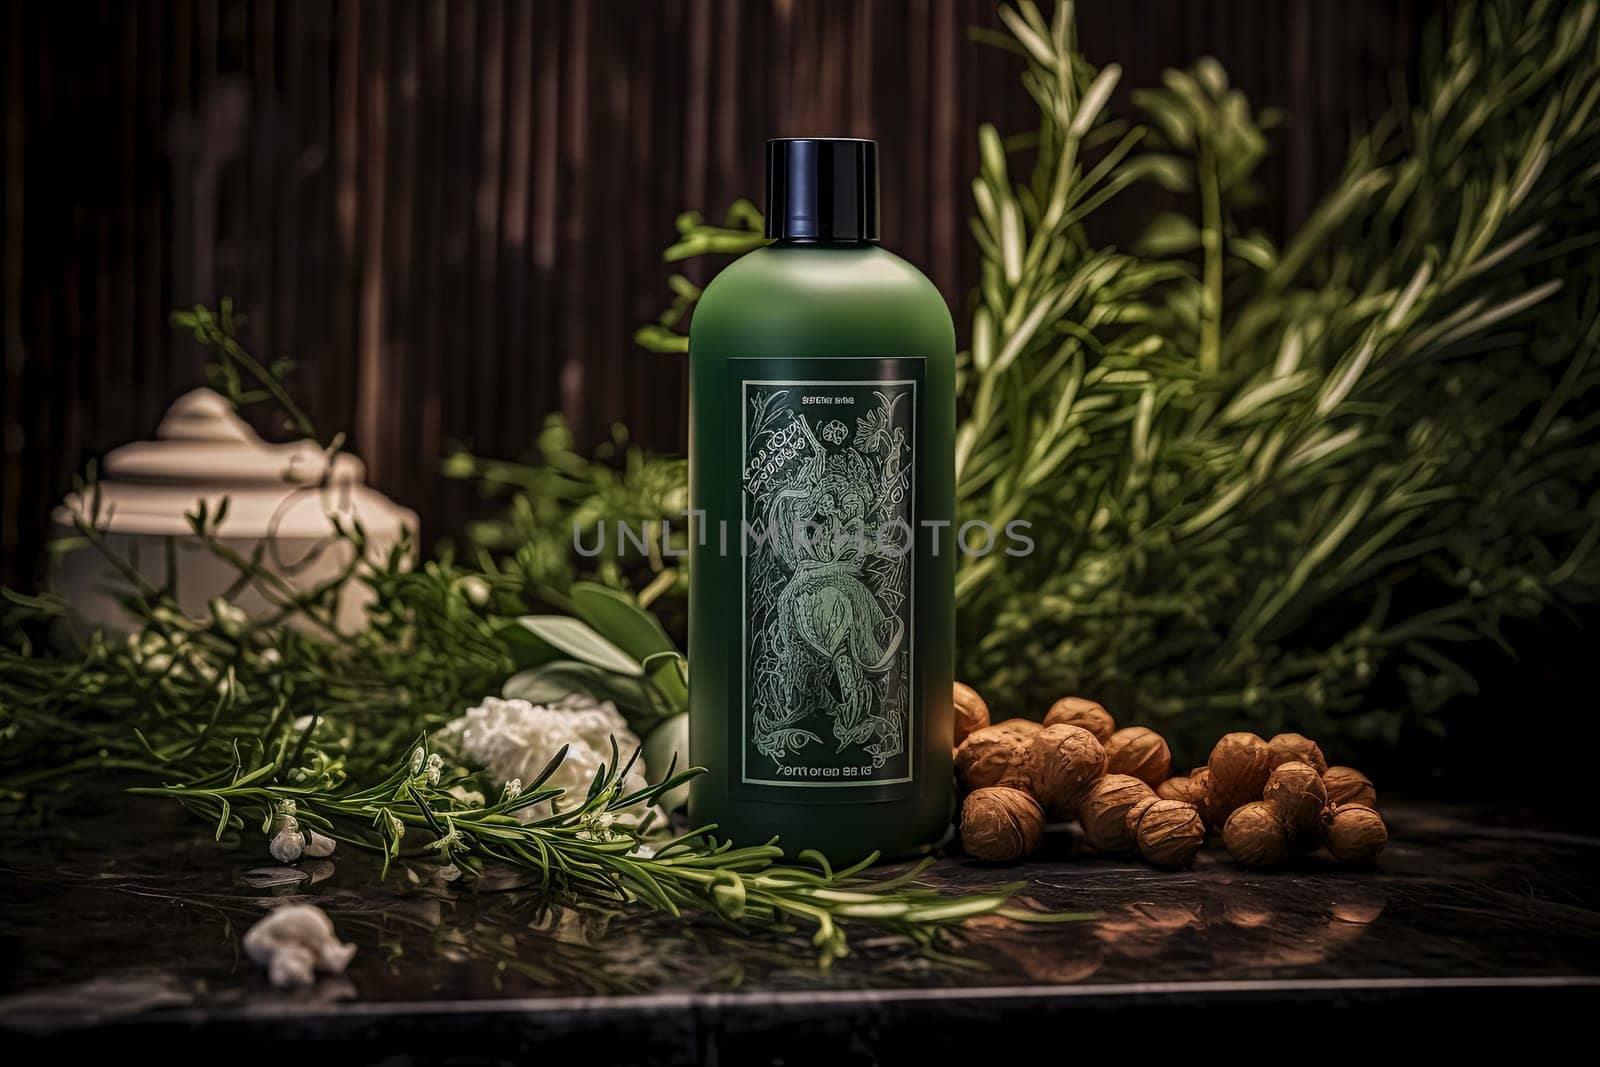 There is a bottle of herbal shampoo with herbs and a small bowl on the table. The bottle is green and the label says Herbal. The herbs and bowl create a natural and calming atmosphere.